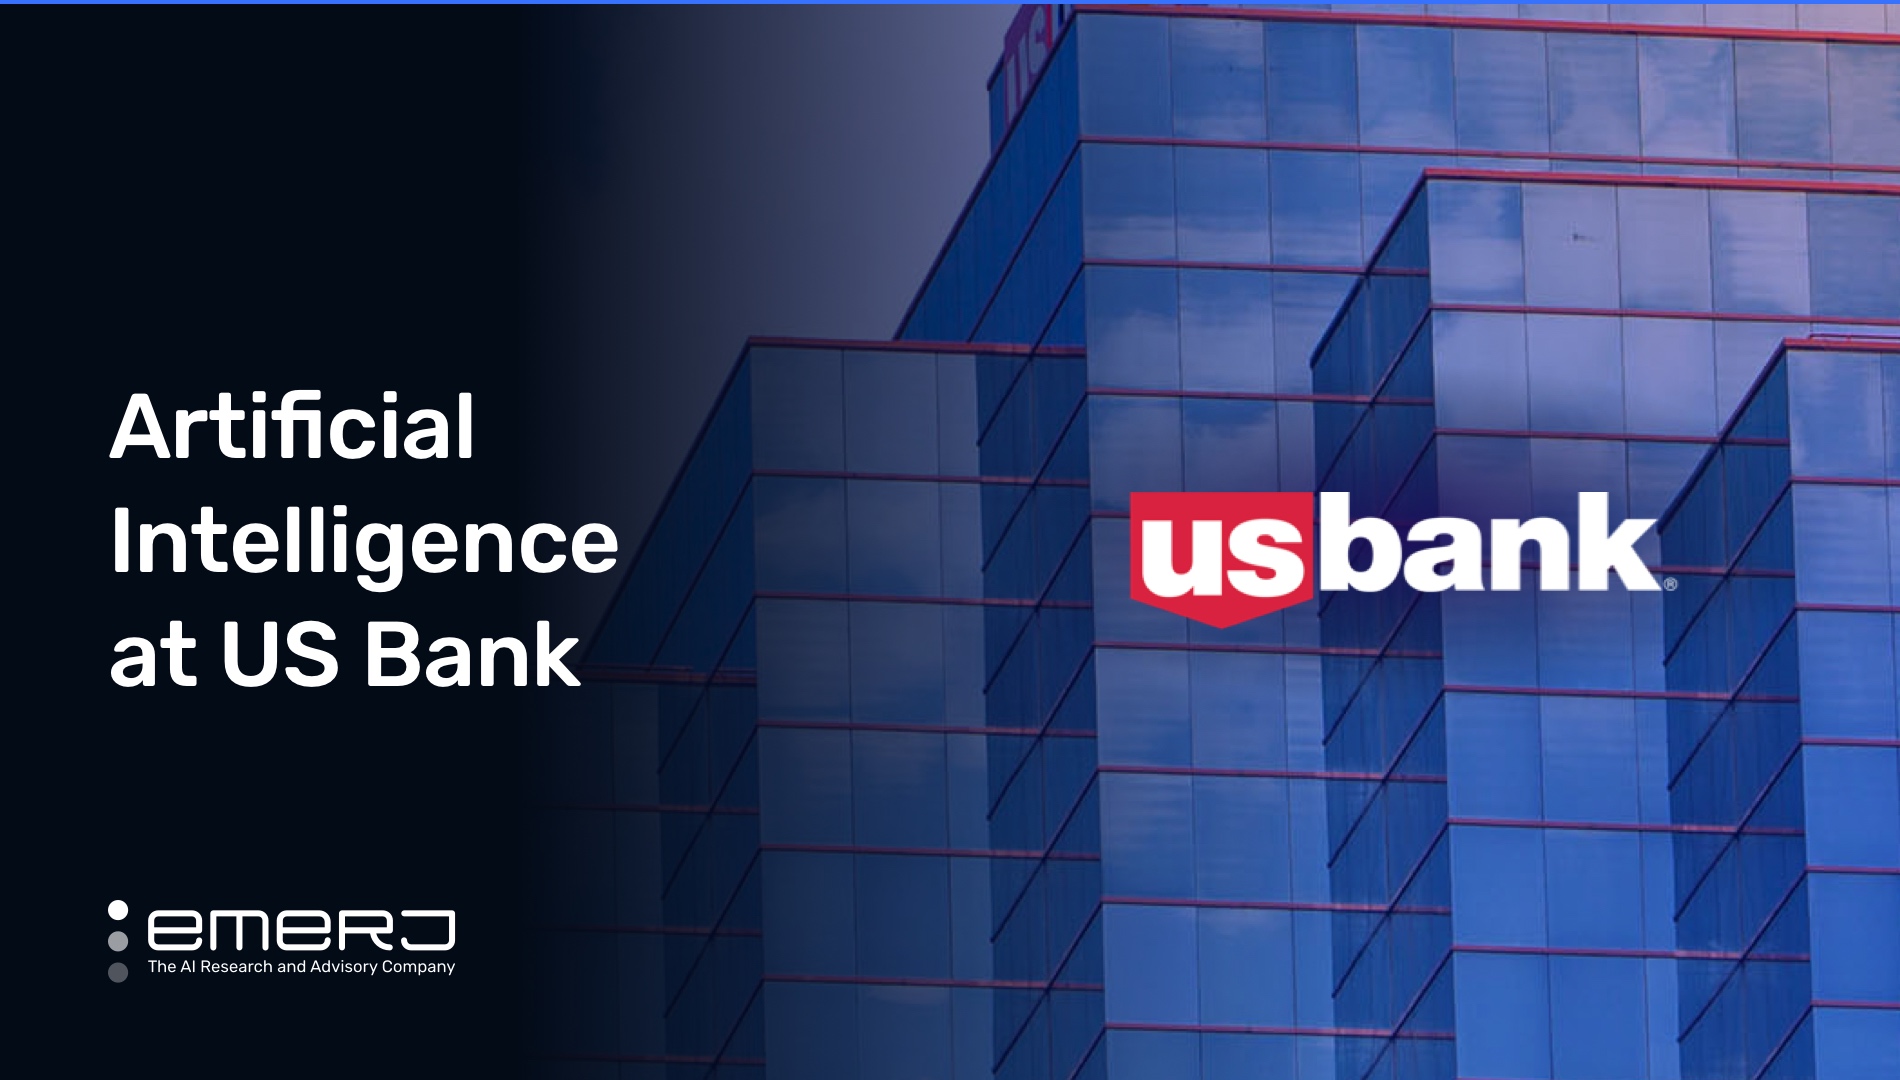 Artificial Intelligence at U.S. Bank – Two Current Use Cases